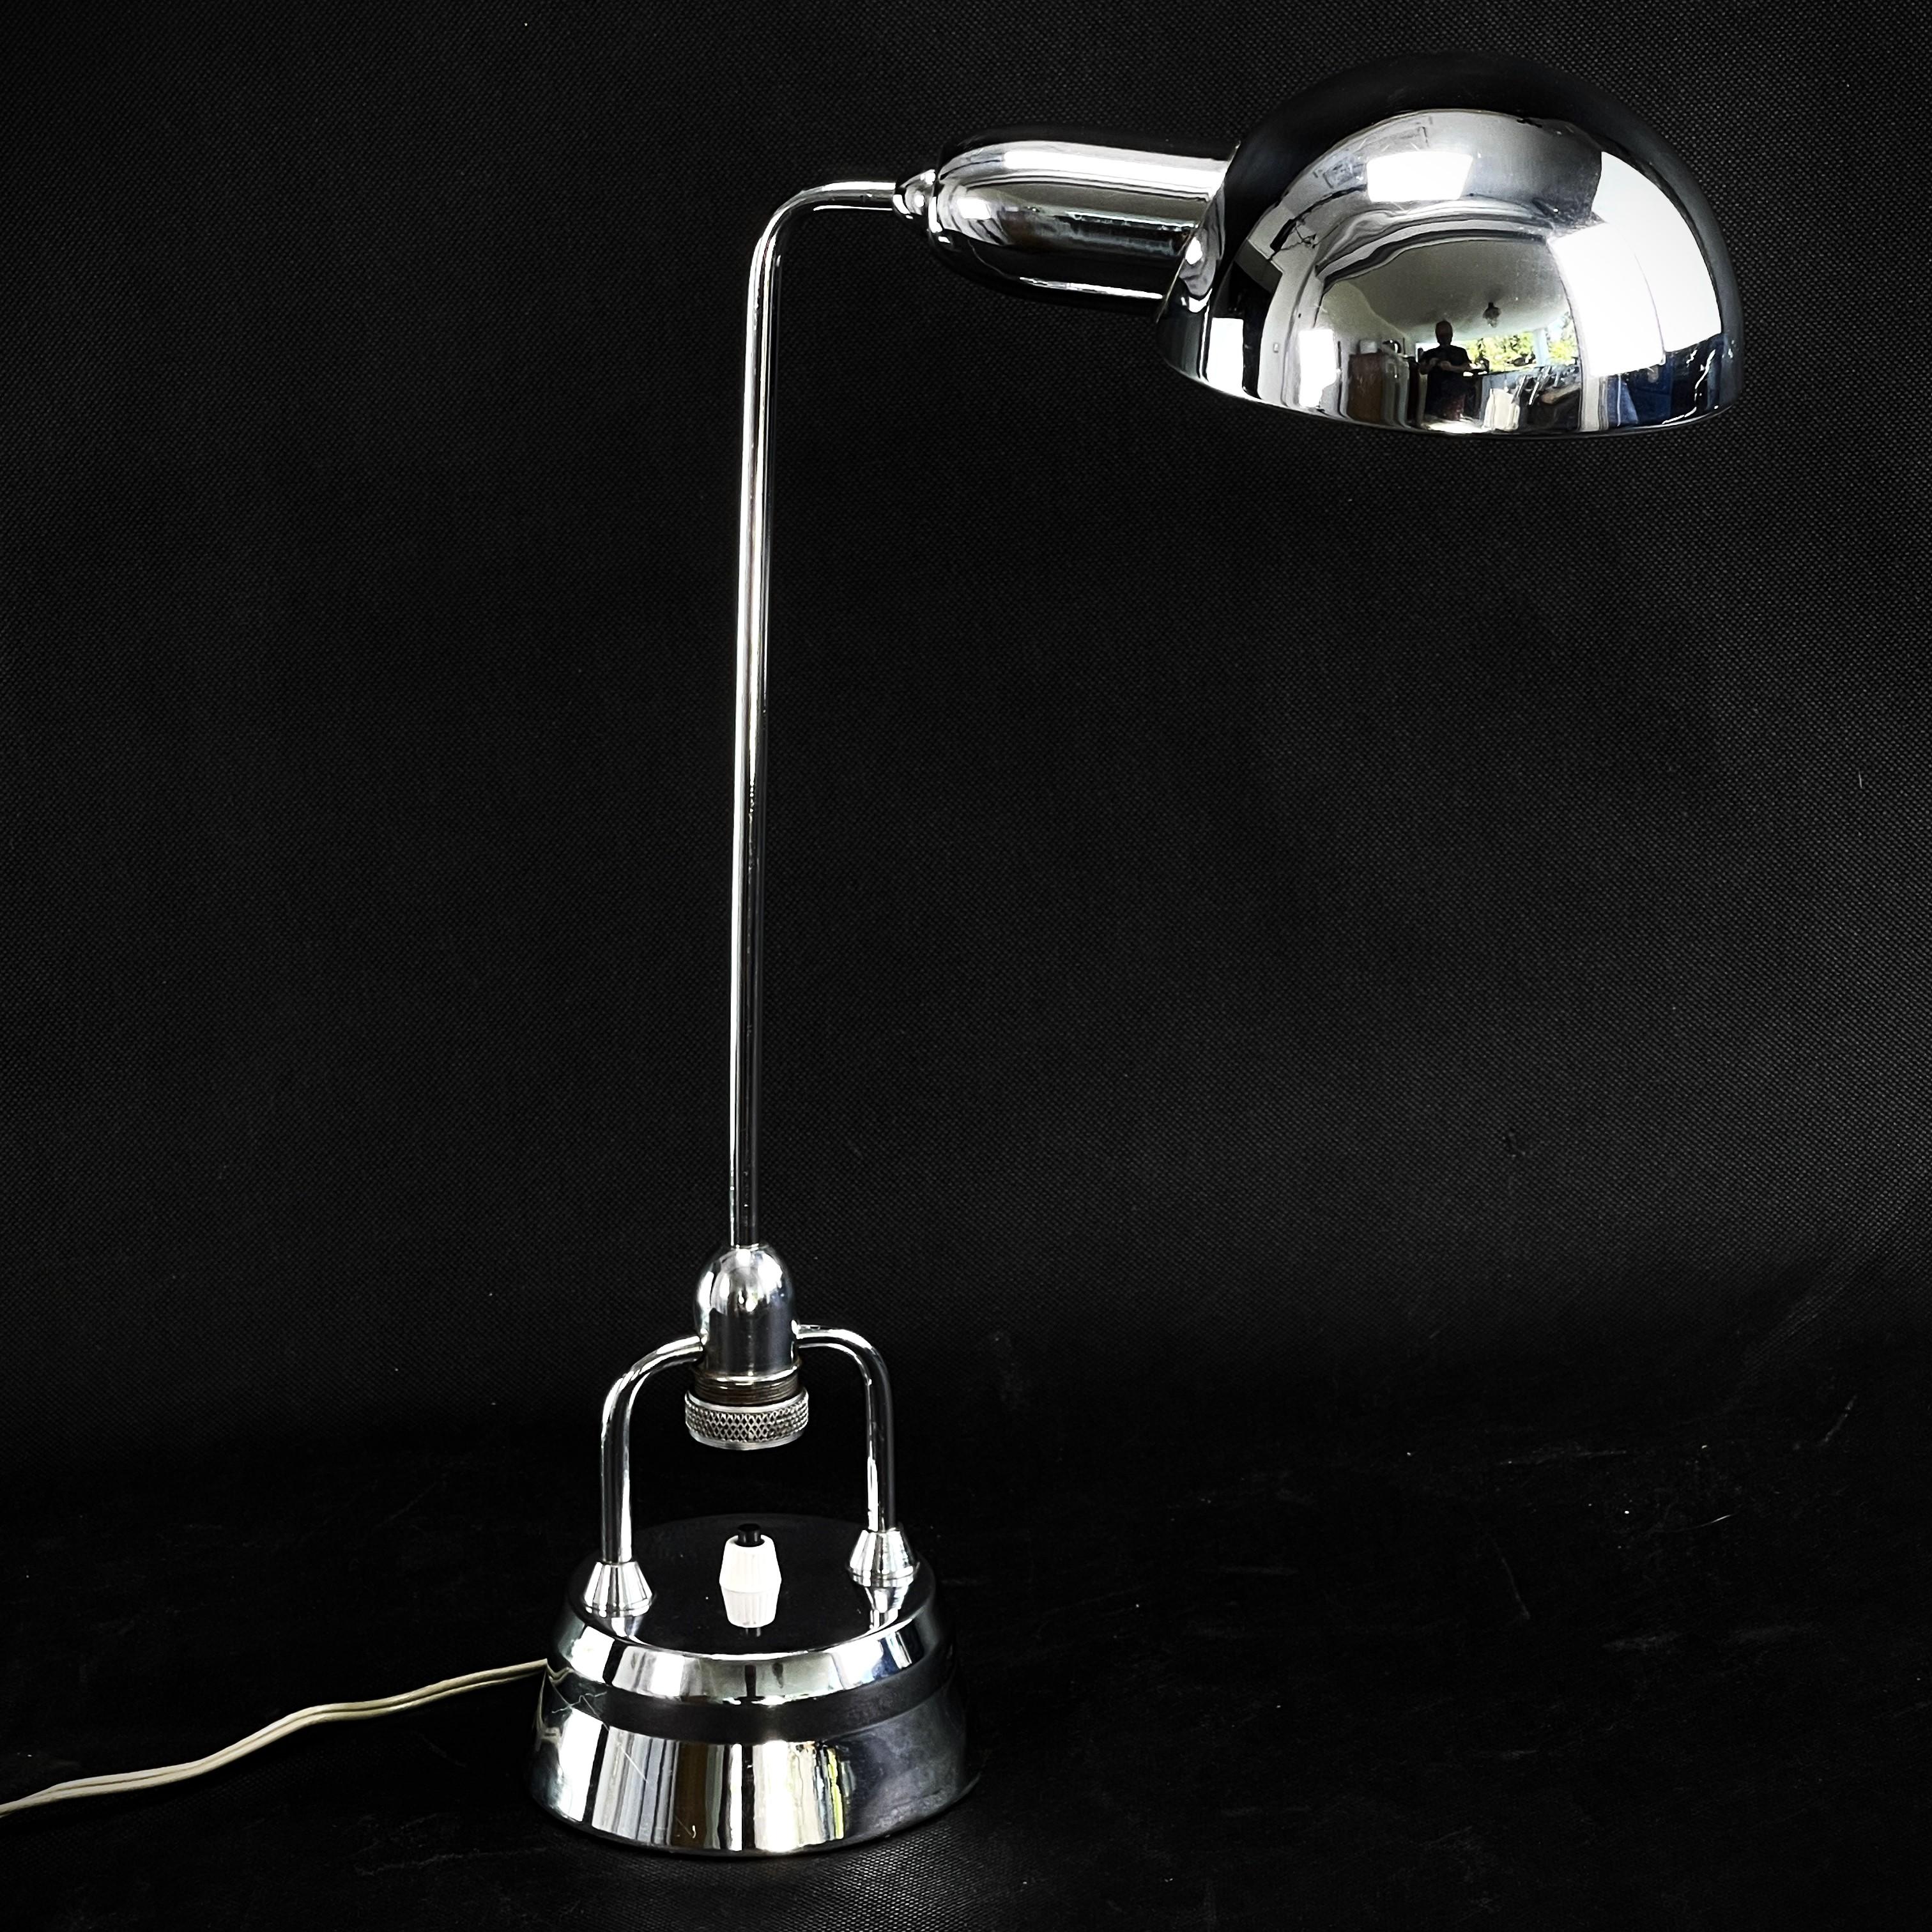 Art Deco table lamp from JUMO - 1930s

The table lamp was designed by the French. Designer Charlotte Perriand for the exhibition 